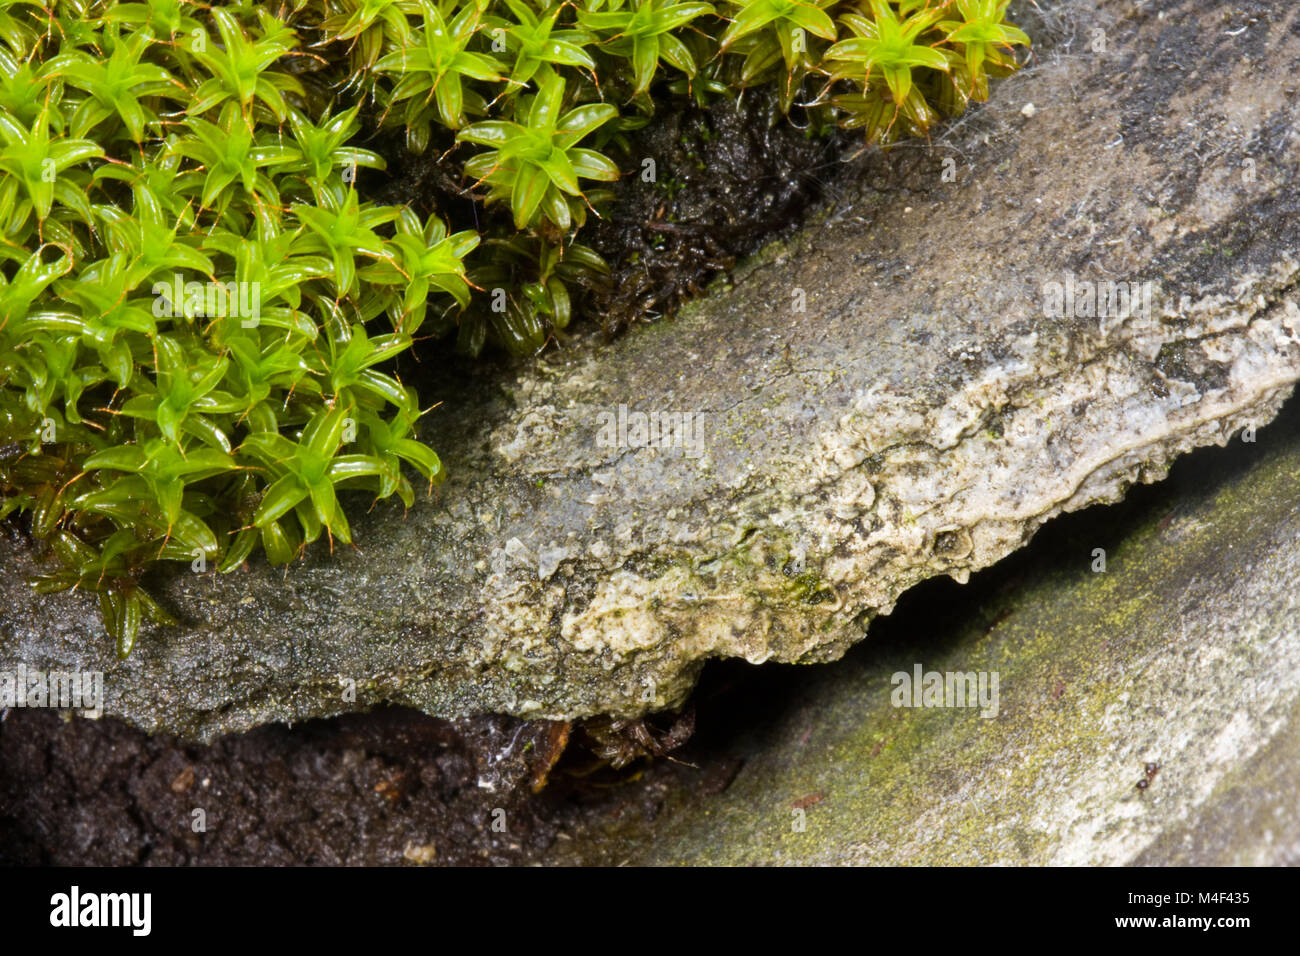 Swan’s-neck thyme-moss growing on old, detoriated corrugated asbestos cement roofing sheets Stock Photo